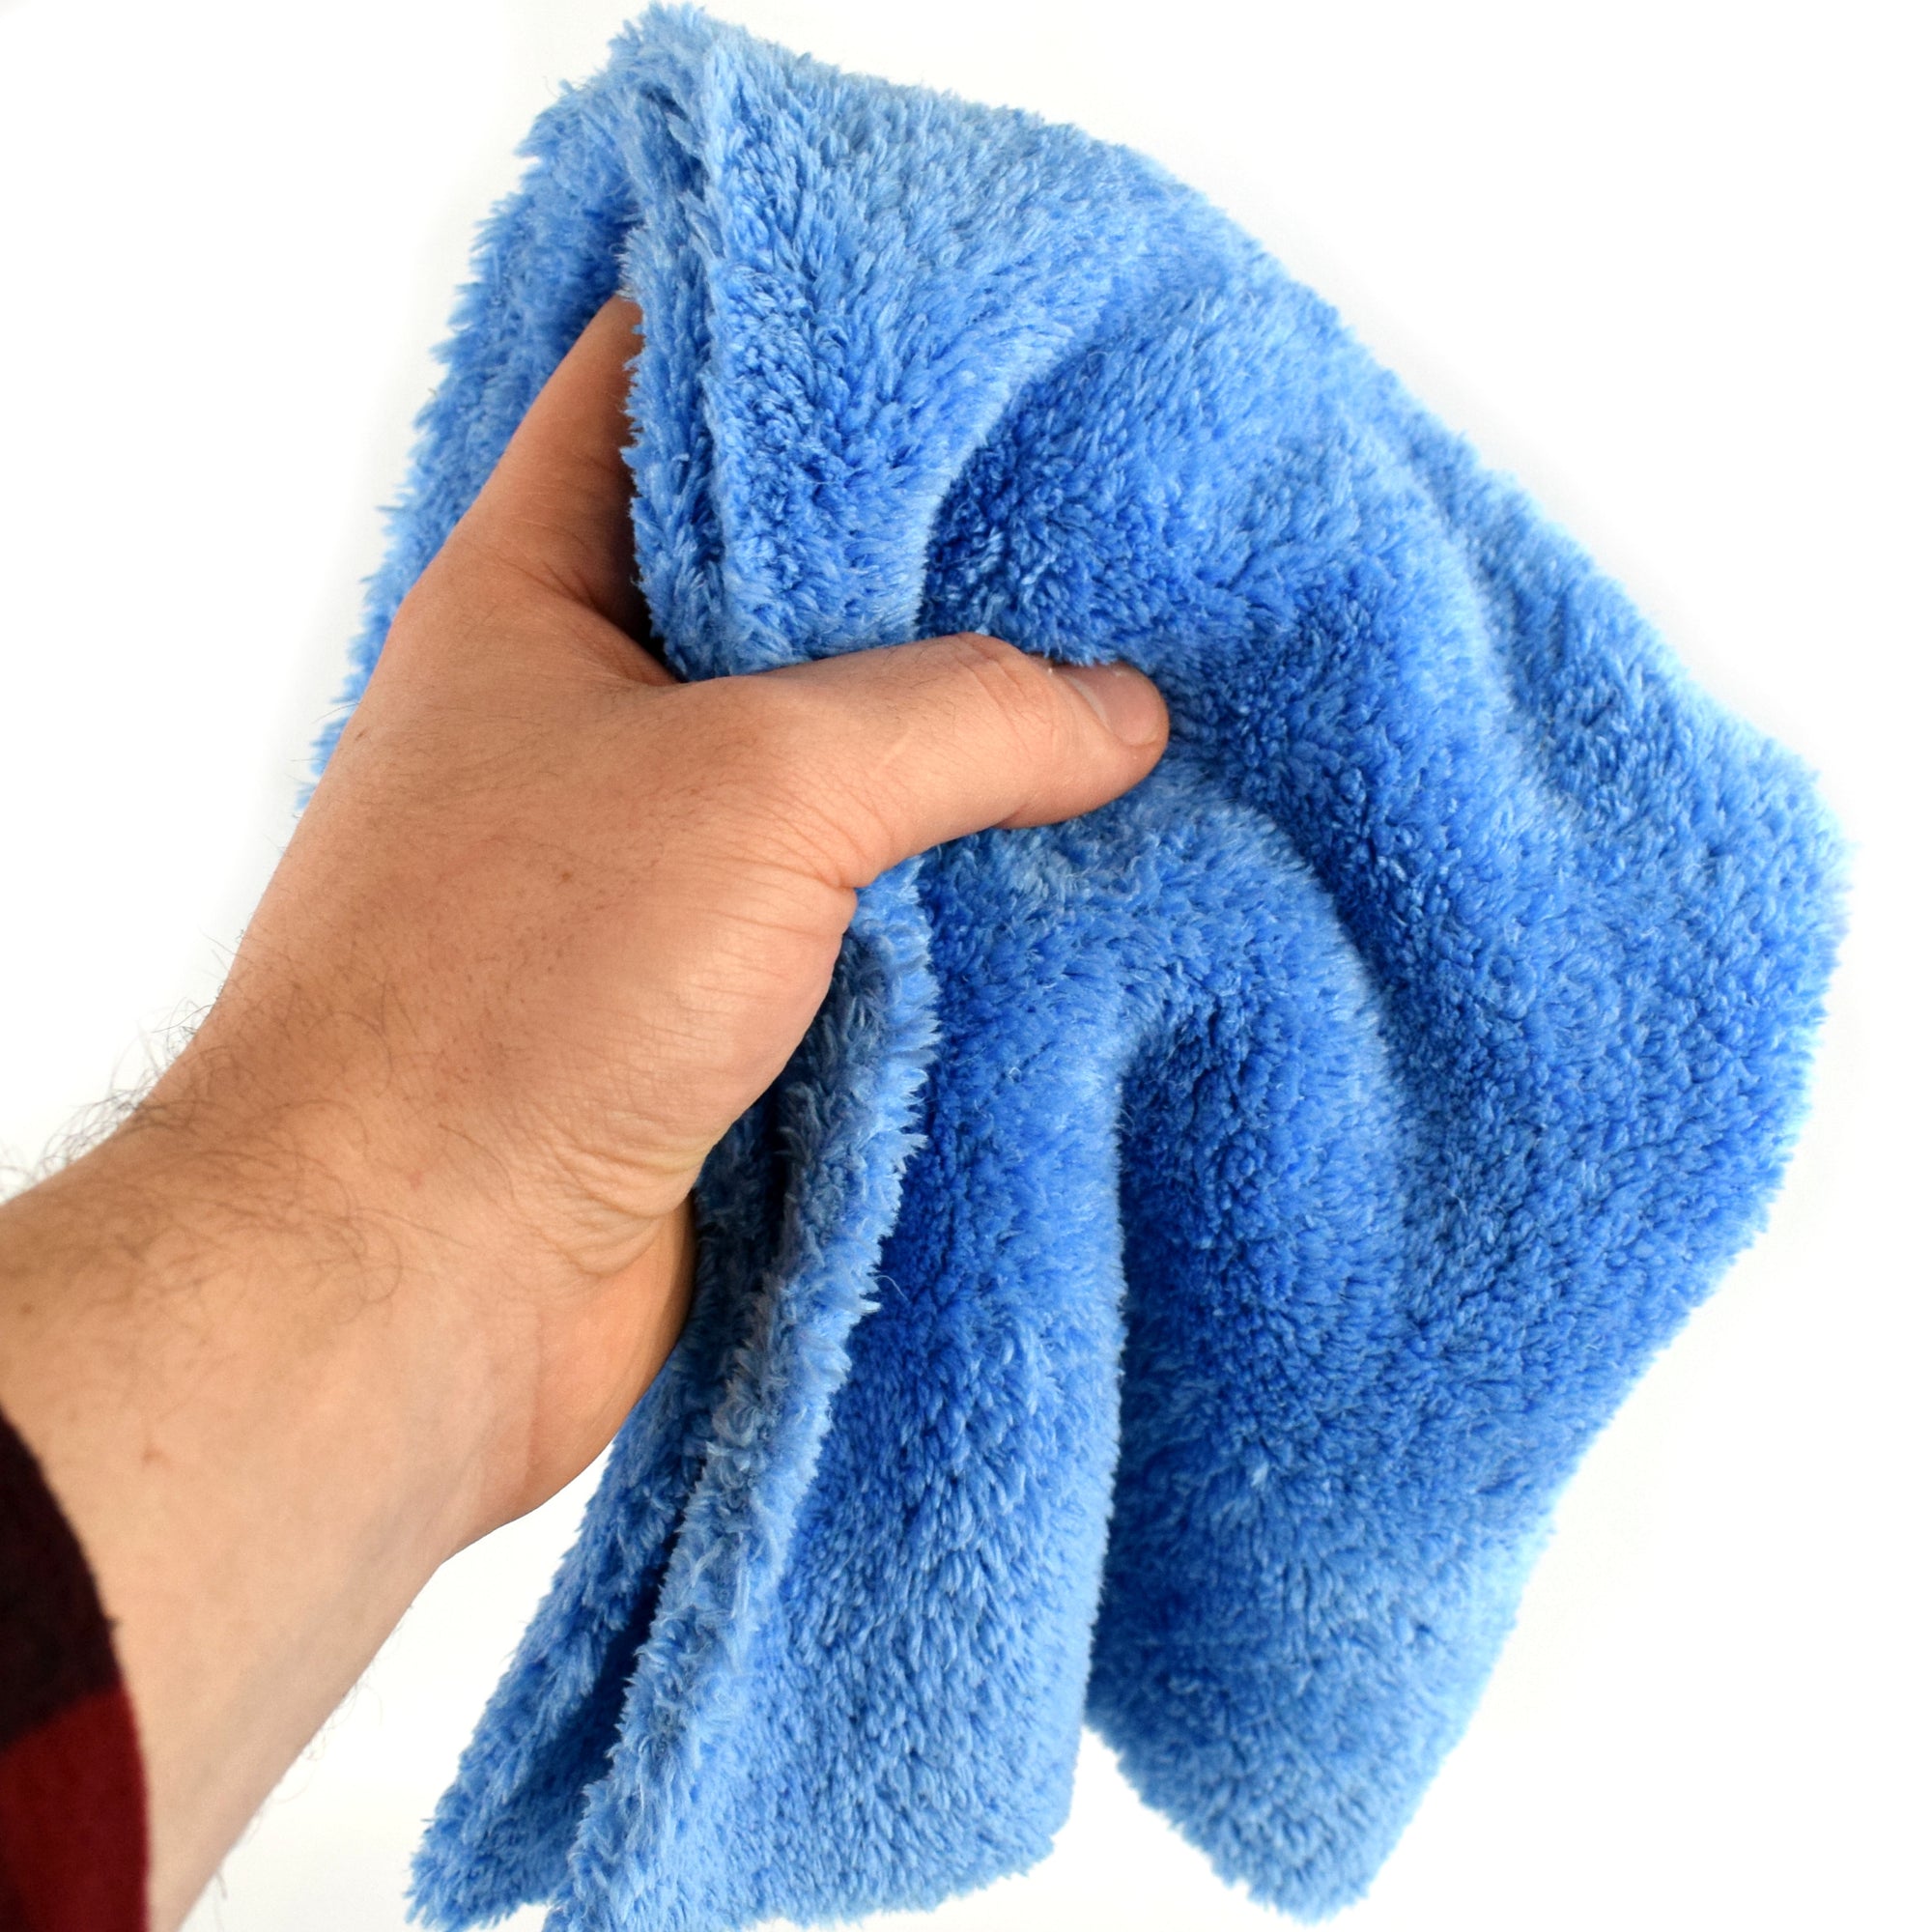 The Rag Company Edgeless 365 Detailing Towel 6 Pack